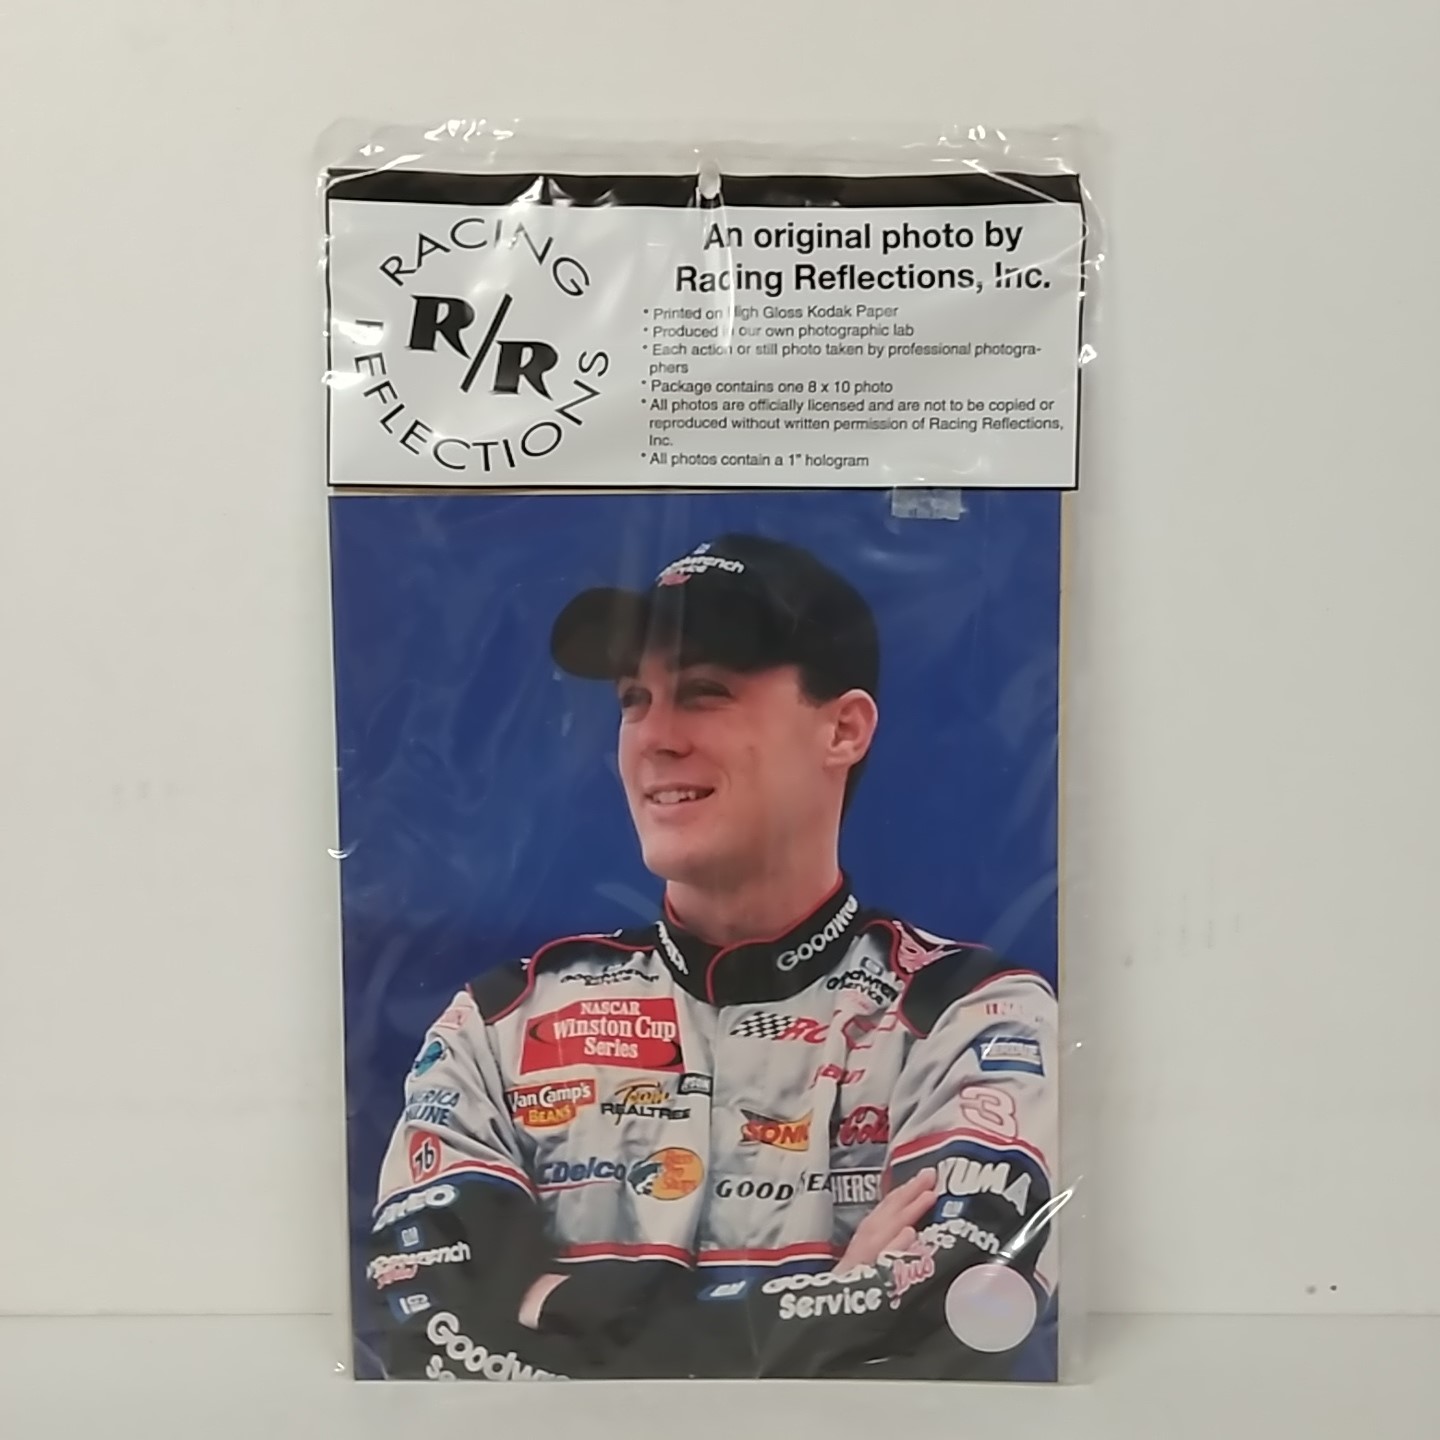 2001 Kevin Harvick Goodwrench "Arms Folded" Racing Reflections Photo